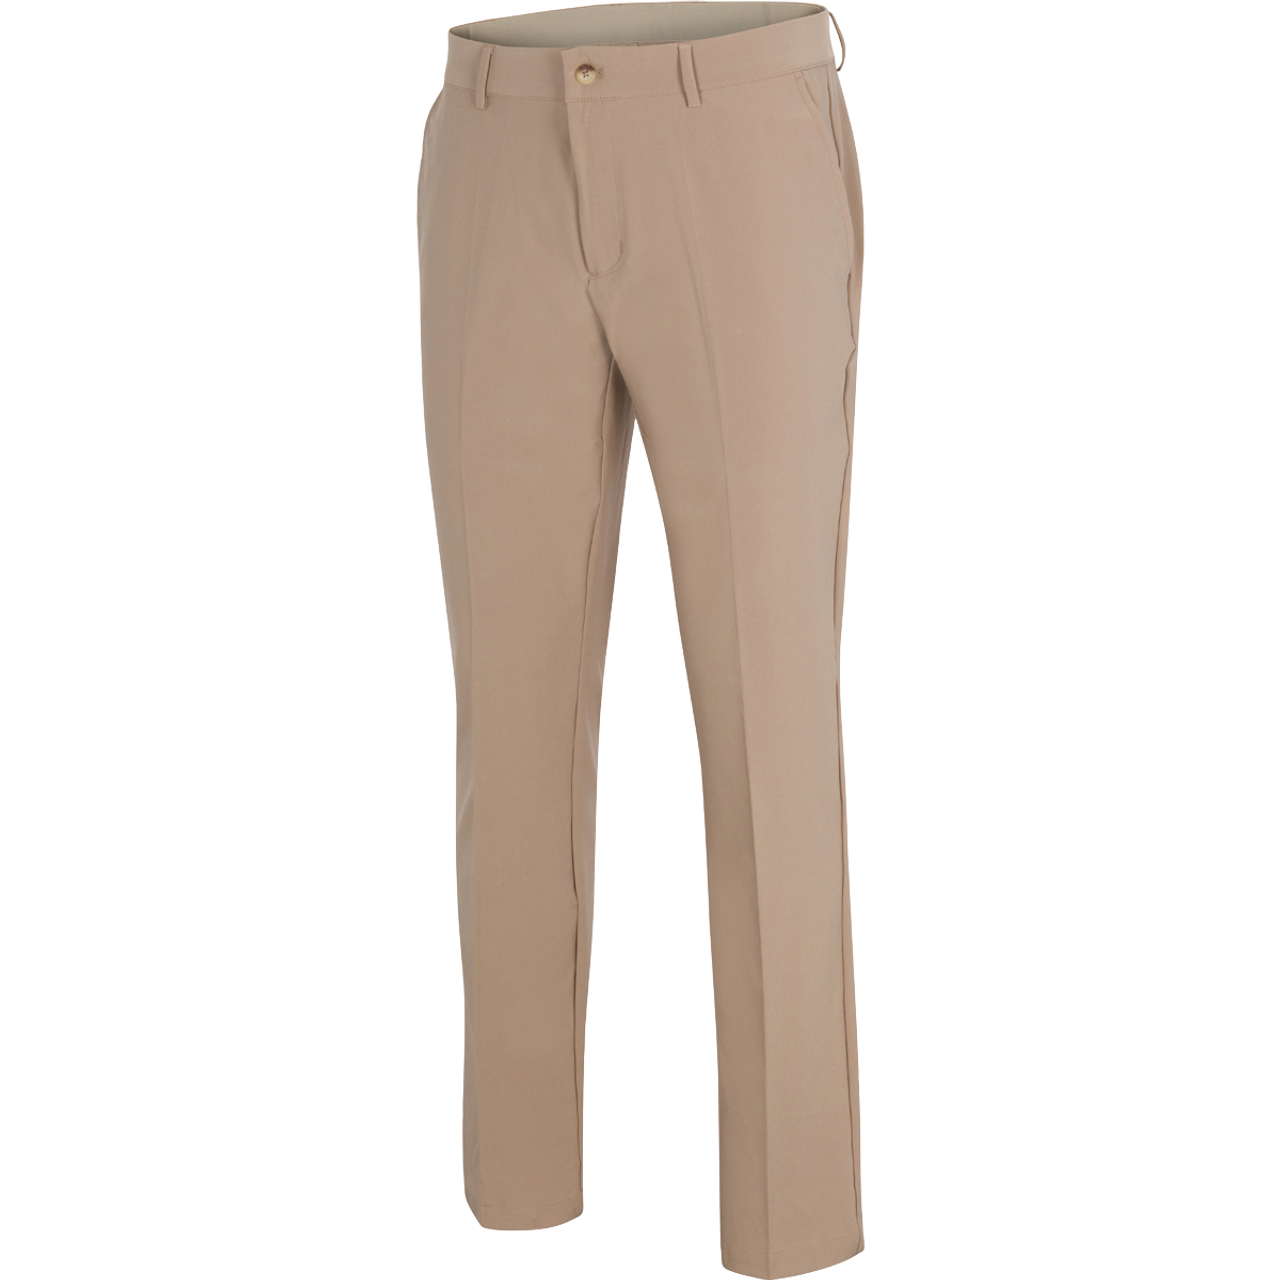 Greg Norman 4-Way Stretch Tech Golf Trouser Pant for men – golfbuyindia